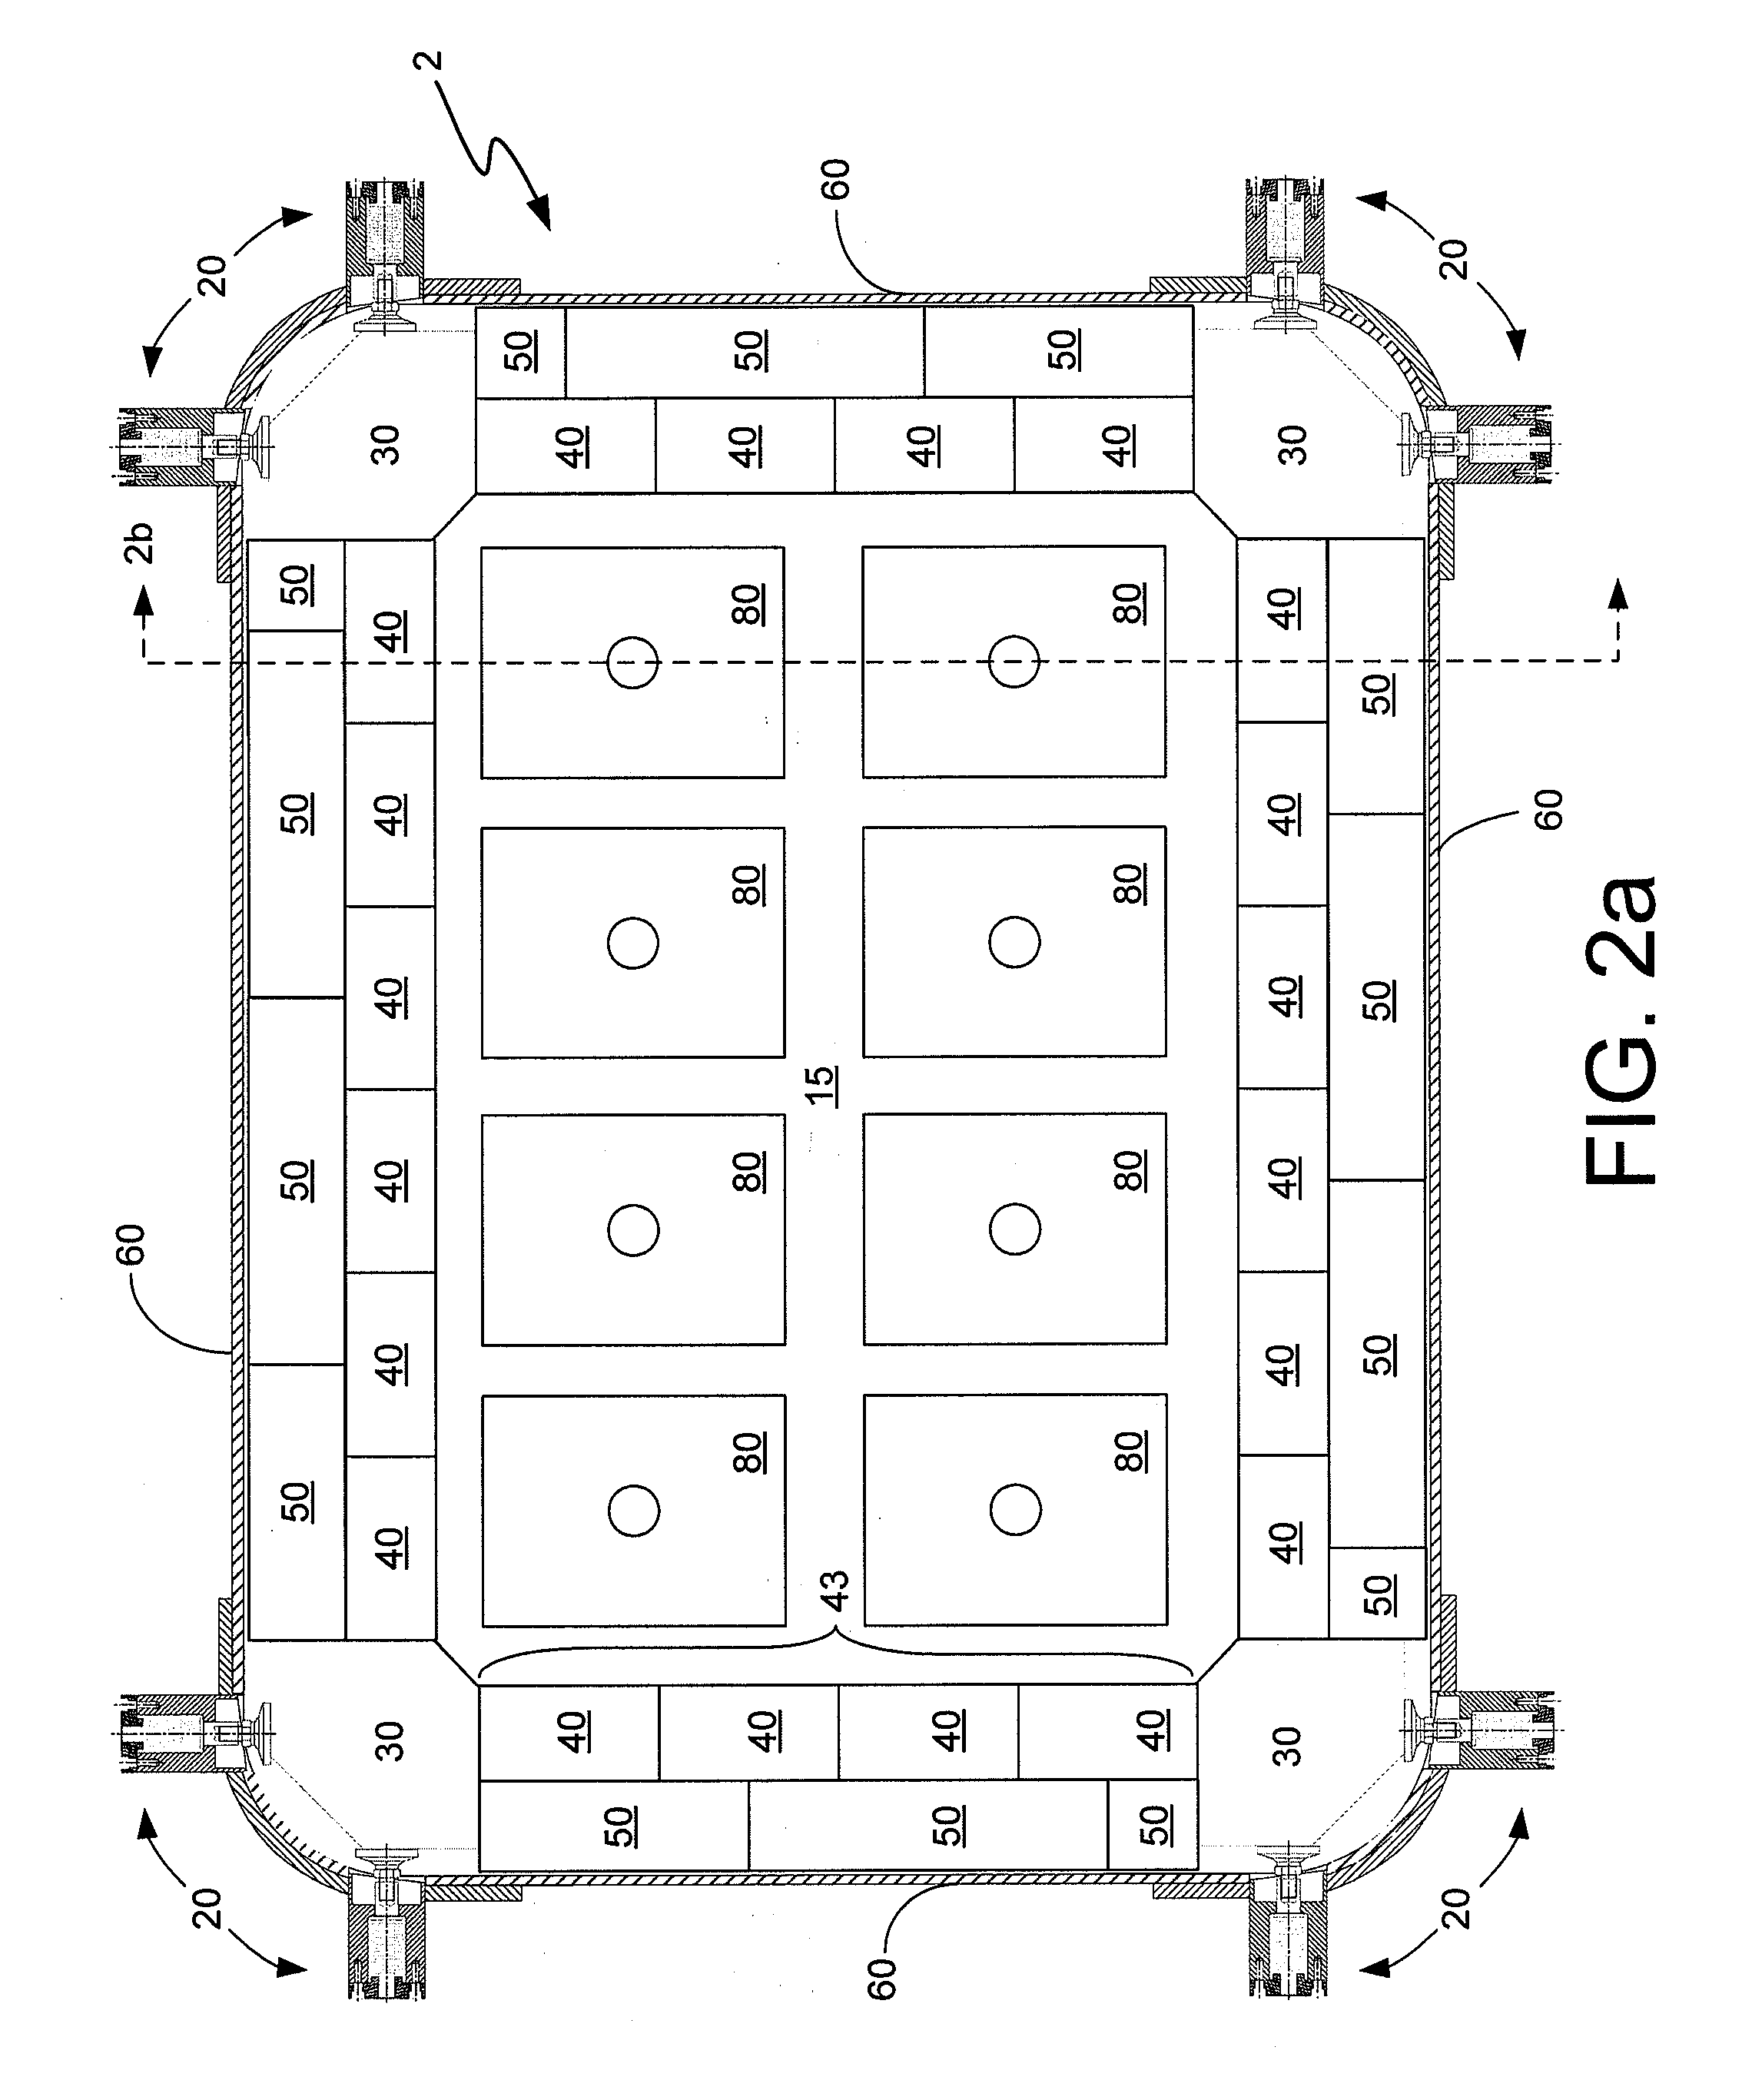 Aluminum electrolysis cell electrolyte containment systems and apparatus and methods relating to the same